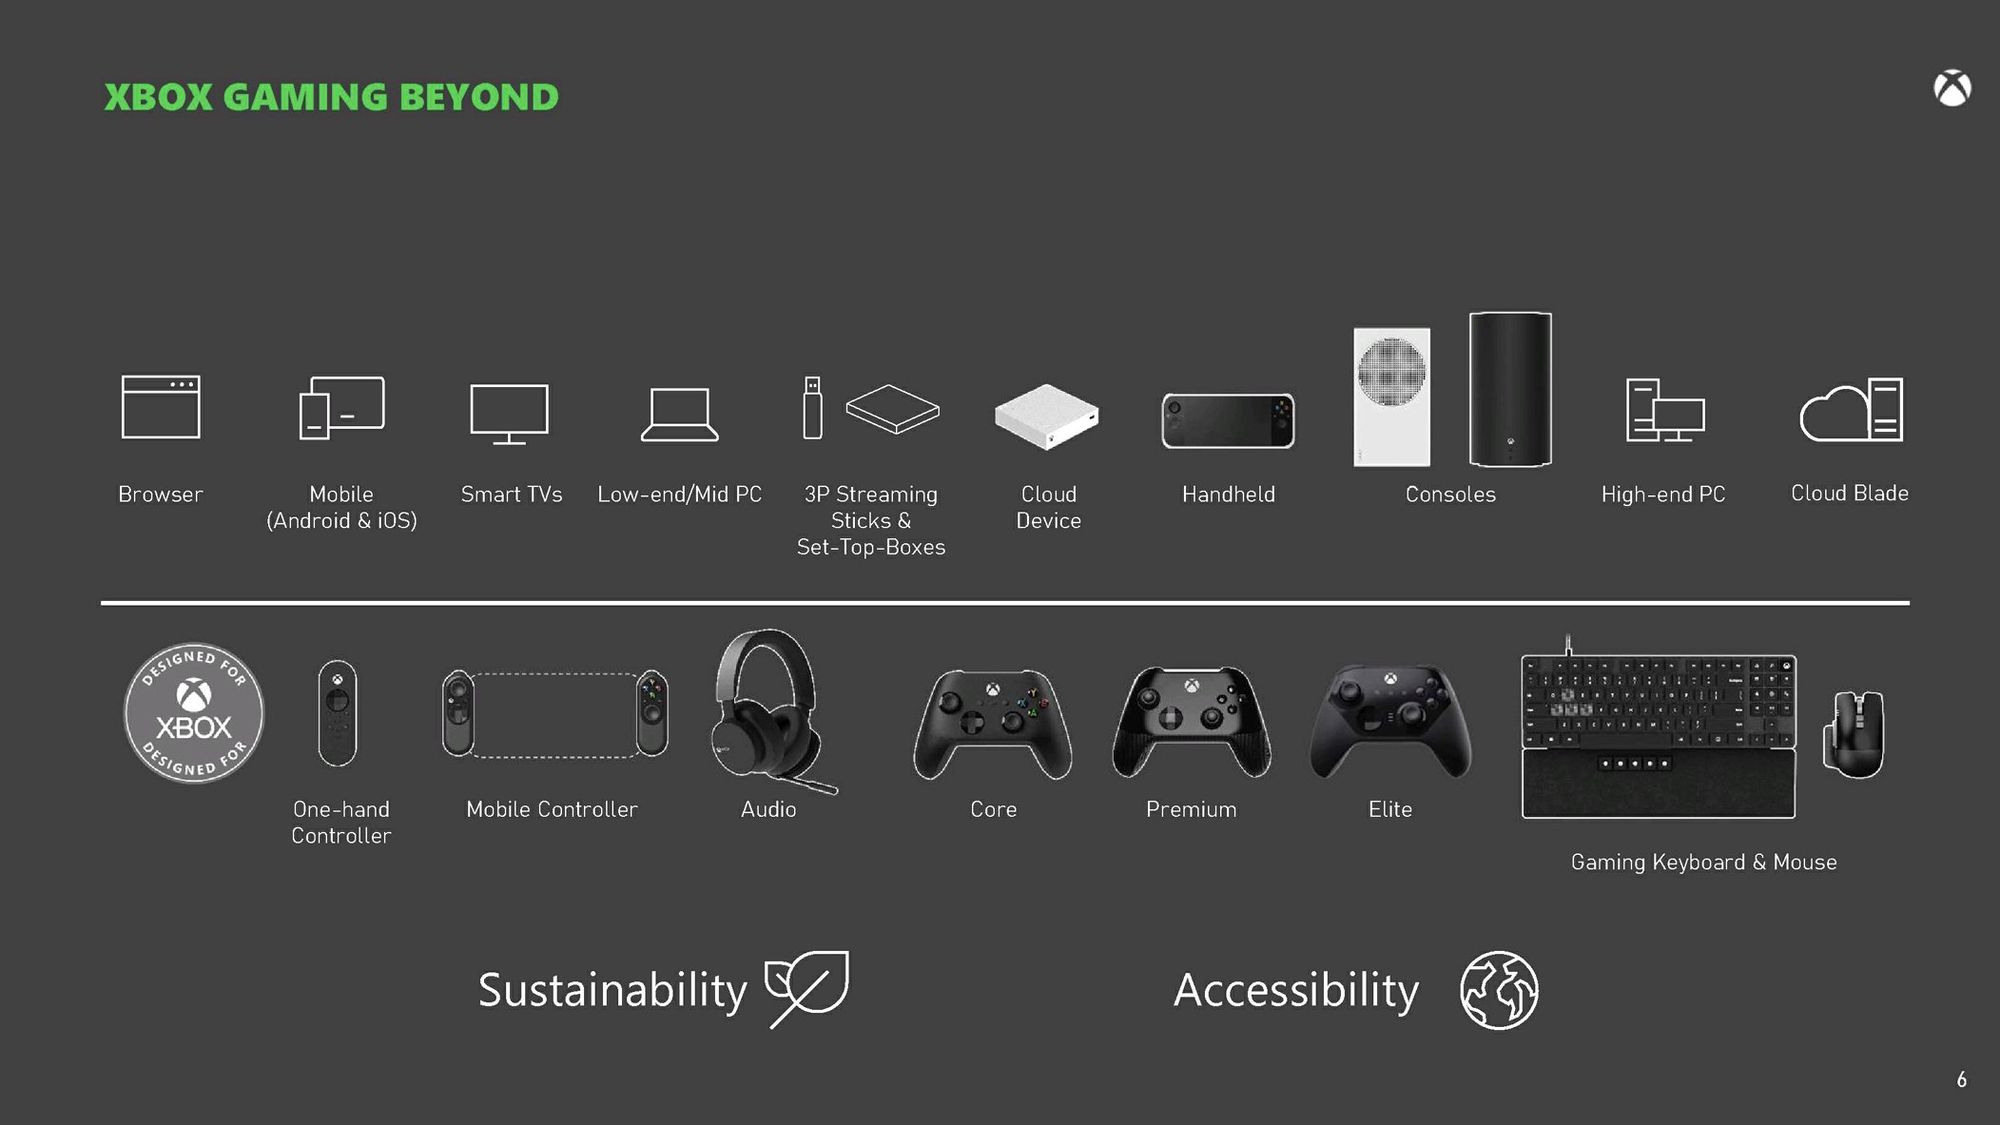 Ways to play Xbox, including a possible handheld